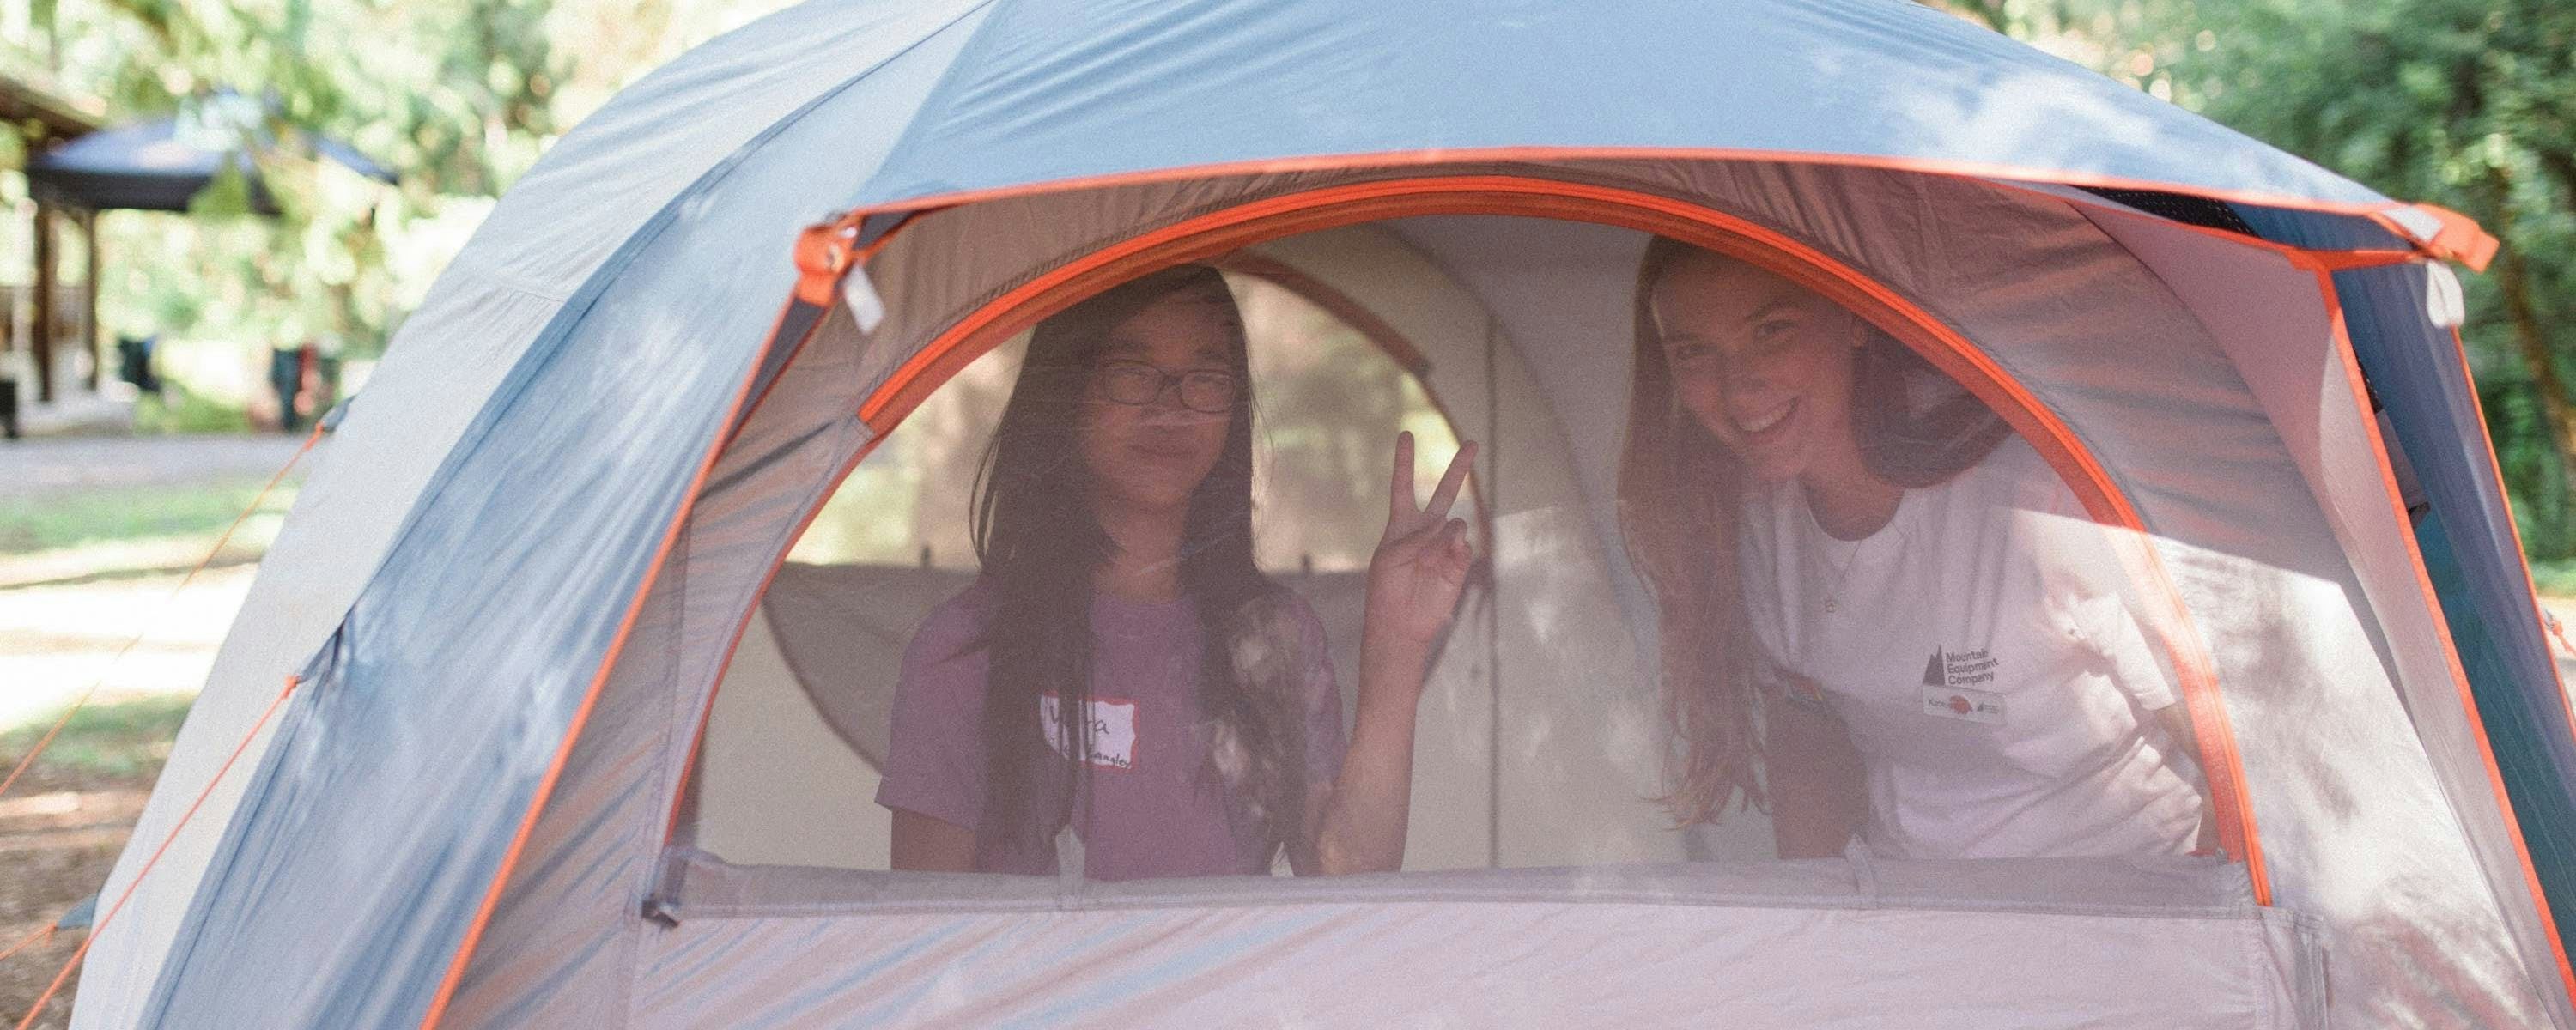 Two campers in a blue and white tent